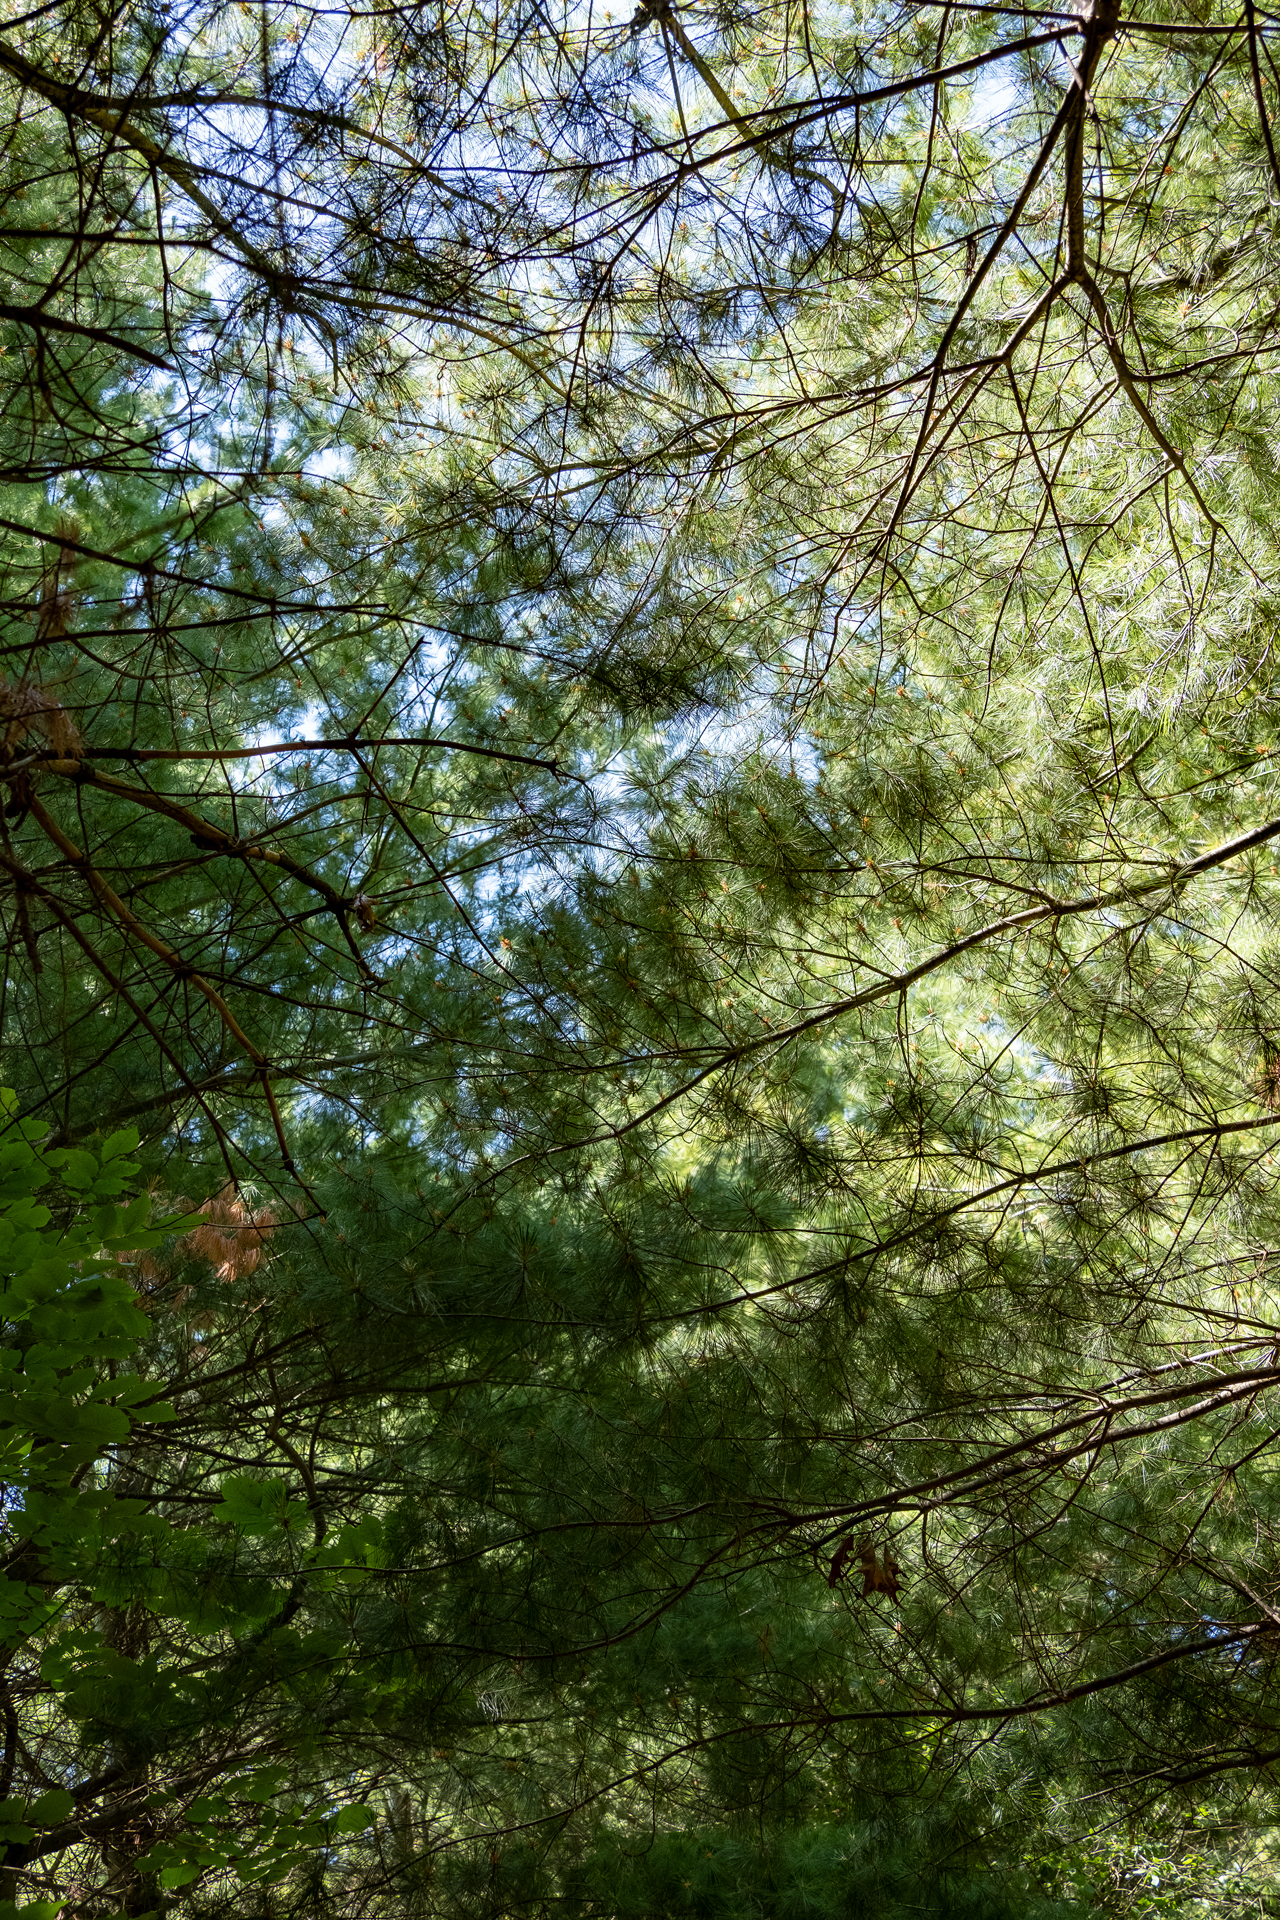 colour photo looking up into the branches of pine trees shading a forest trail